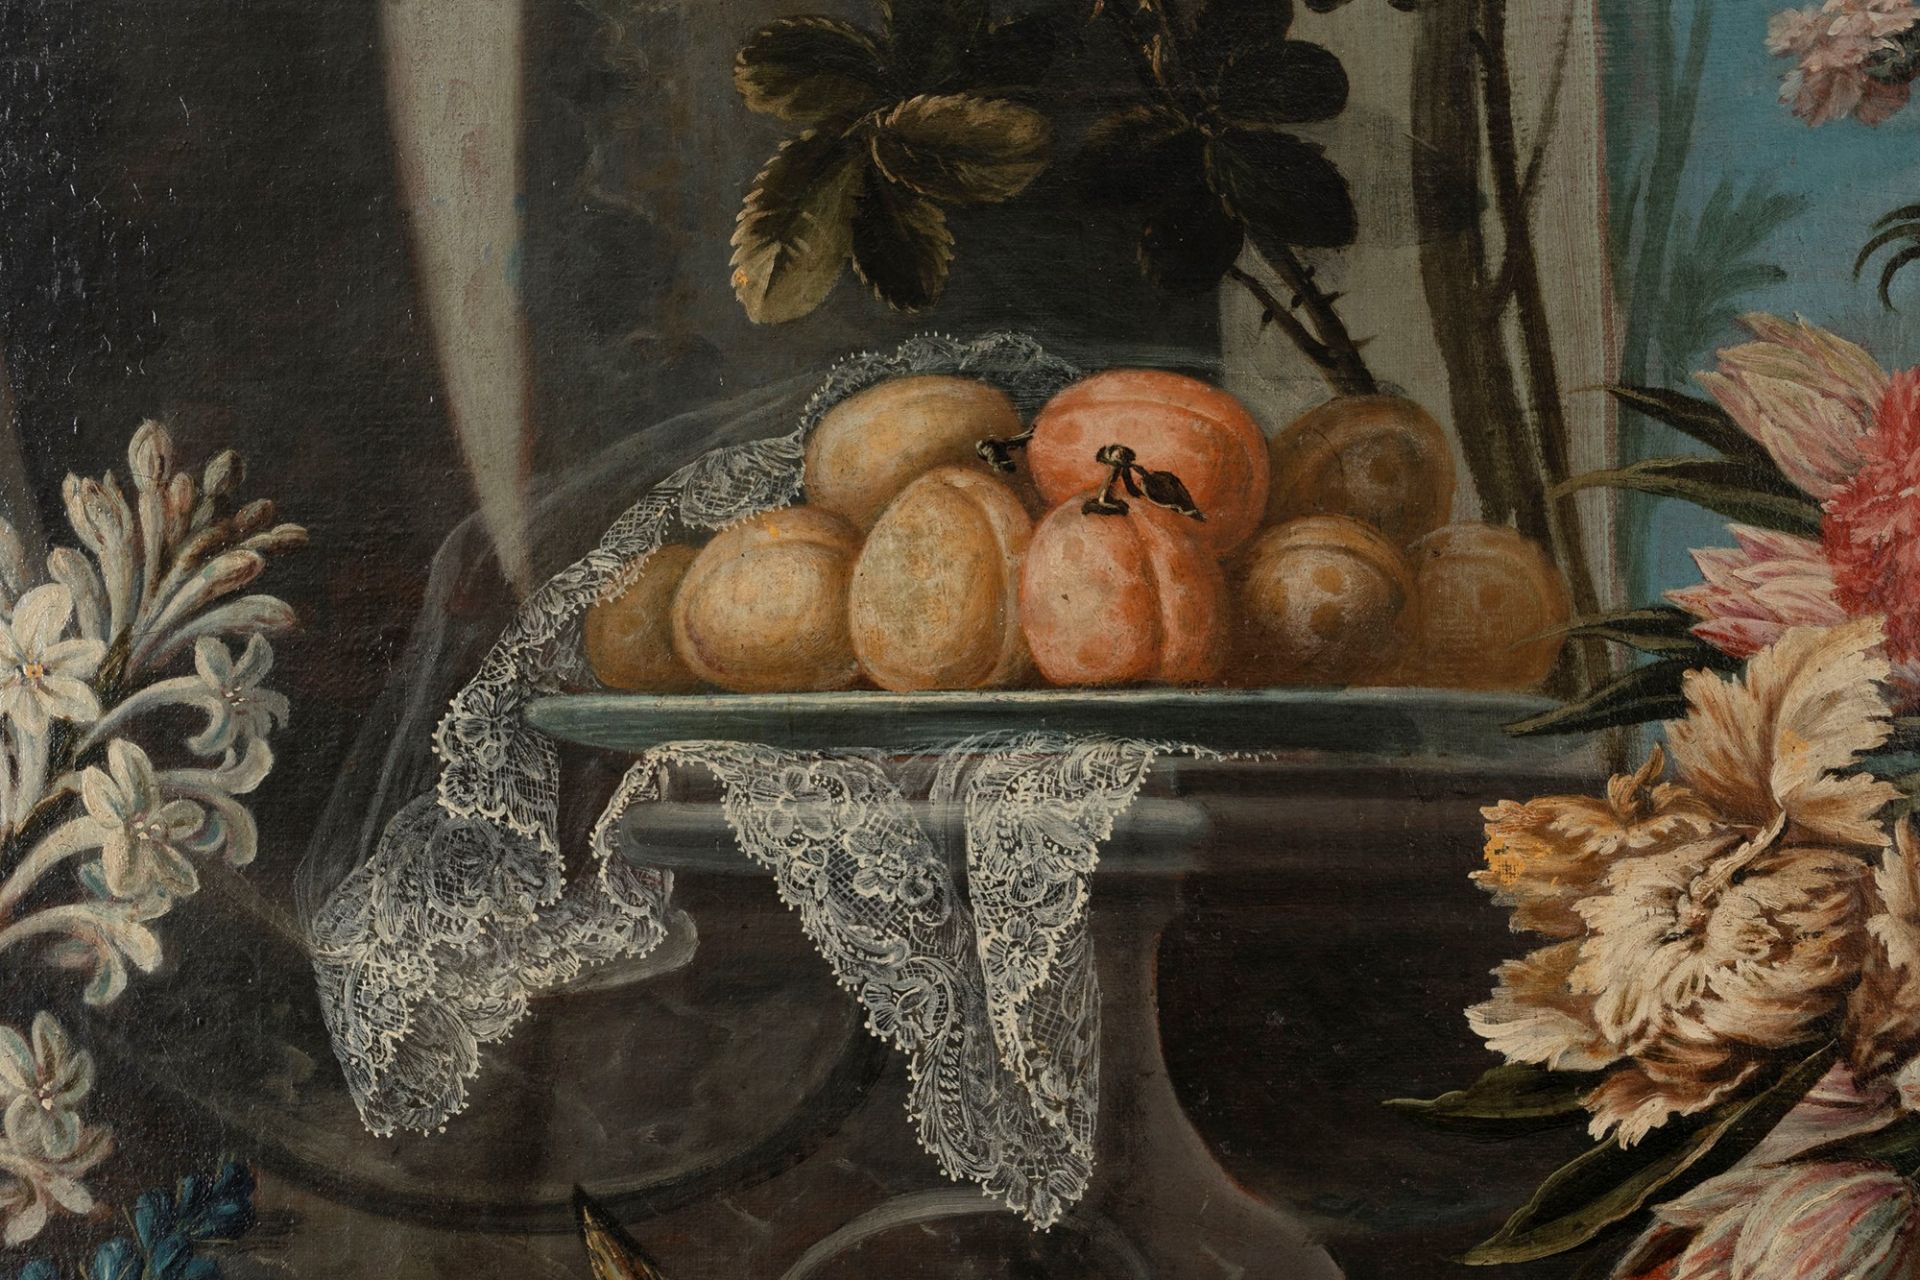 Lombard School, XVIII century - Flowers and fruit in an Italian garden with bunnies and parrots - Image 7 of 8